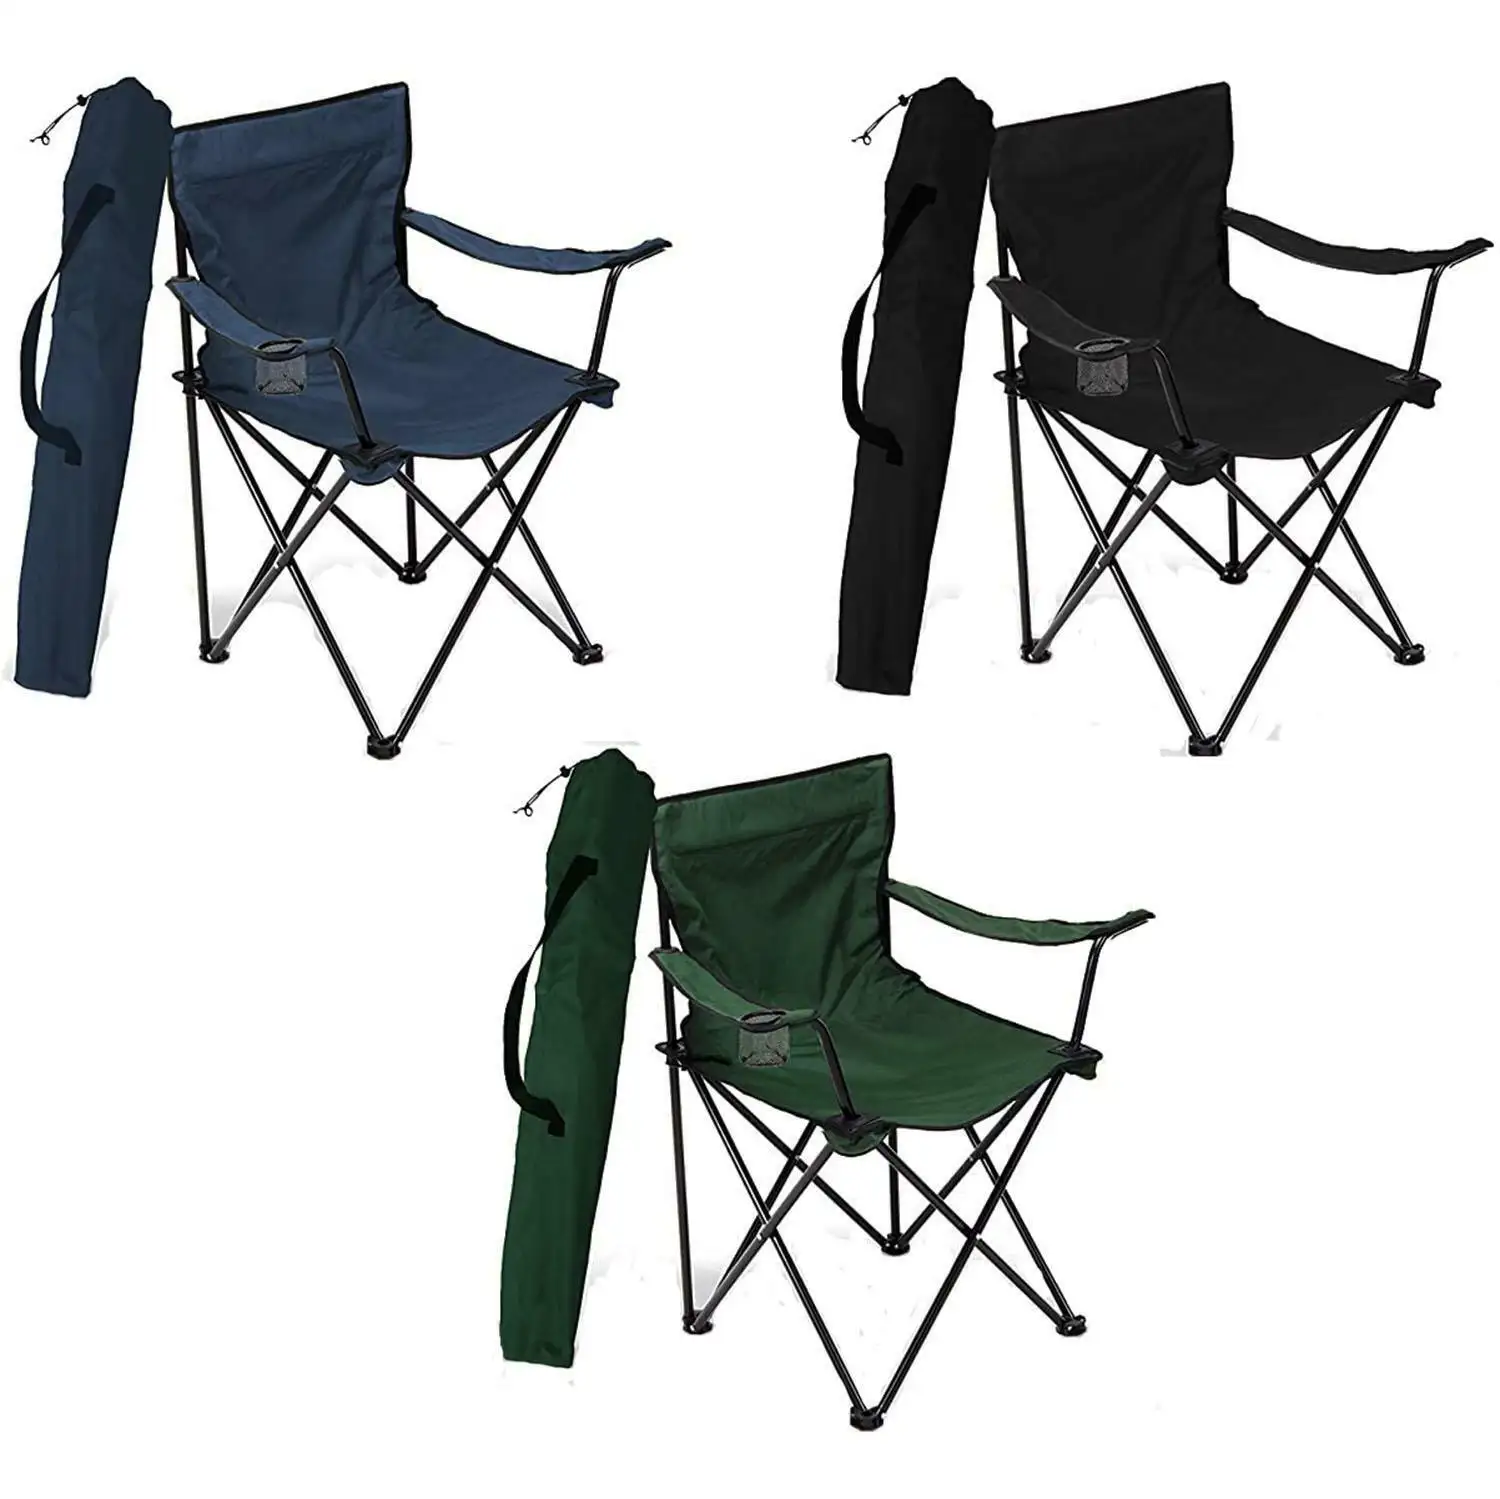 Outdoor Camping Chair folding arm chair outdoor camping folding chair